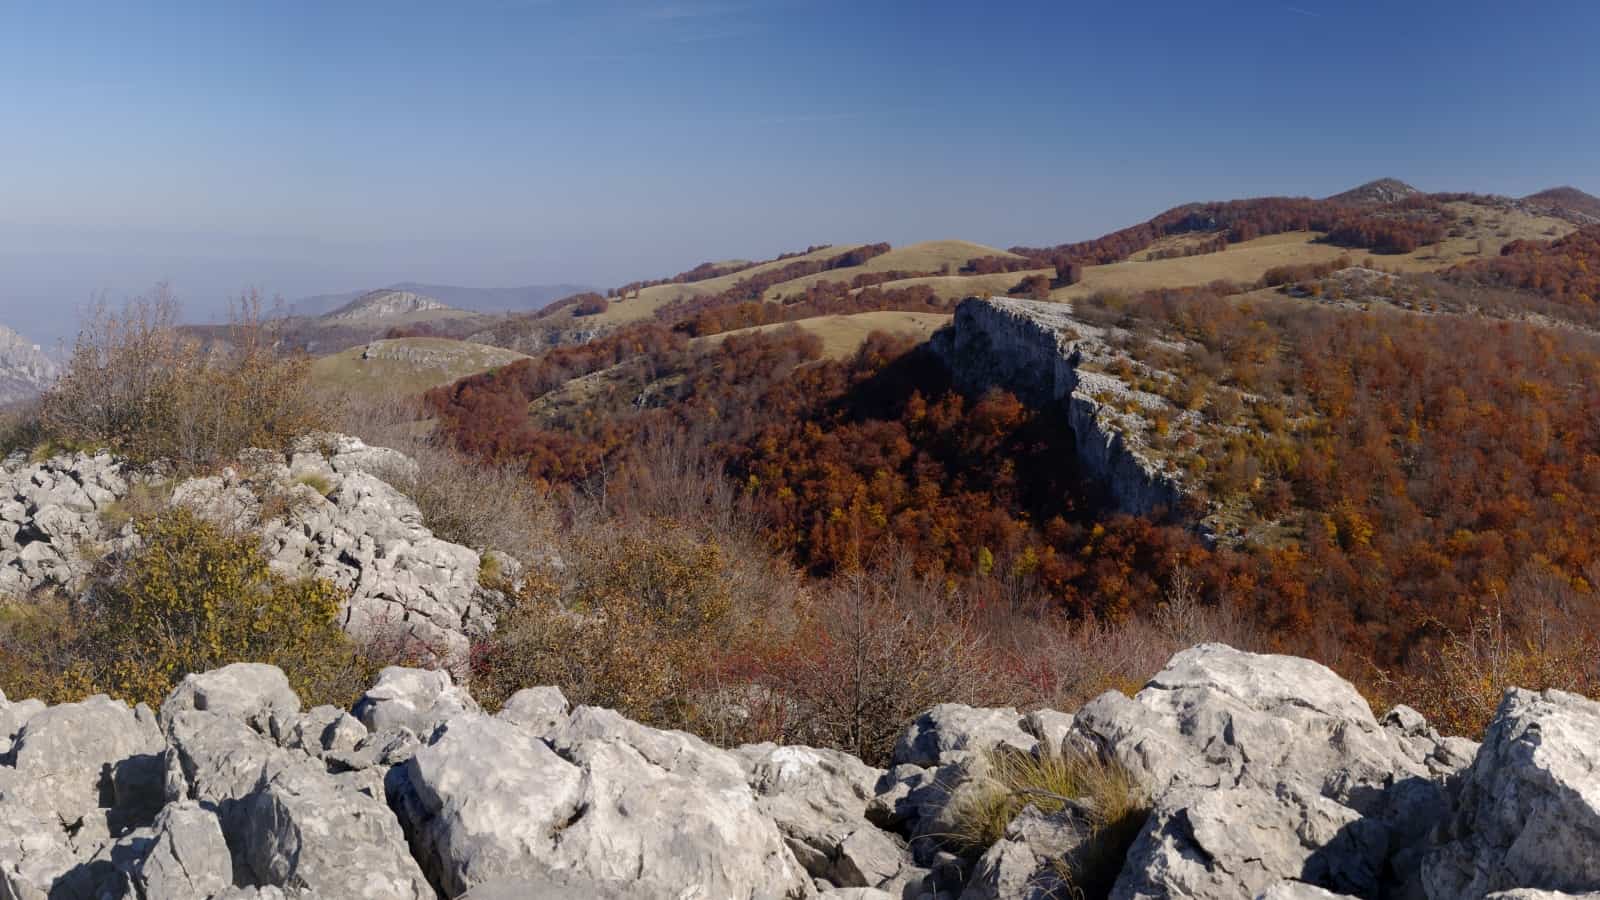 The view at the route "The secret routes of water - Karst" - anorama view of Vrachanski Balkan Nature Park- photo: Vrachanski Balkan Nature Park/Krasimir Lakovski